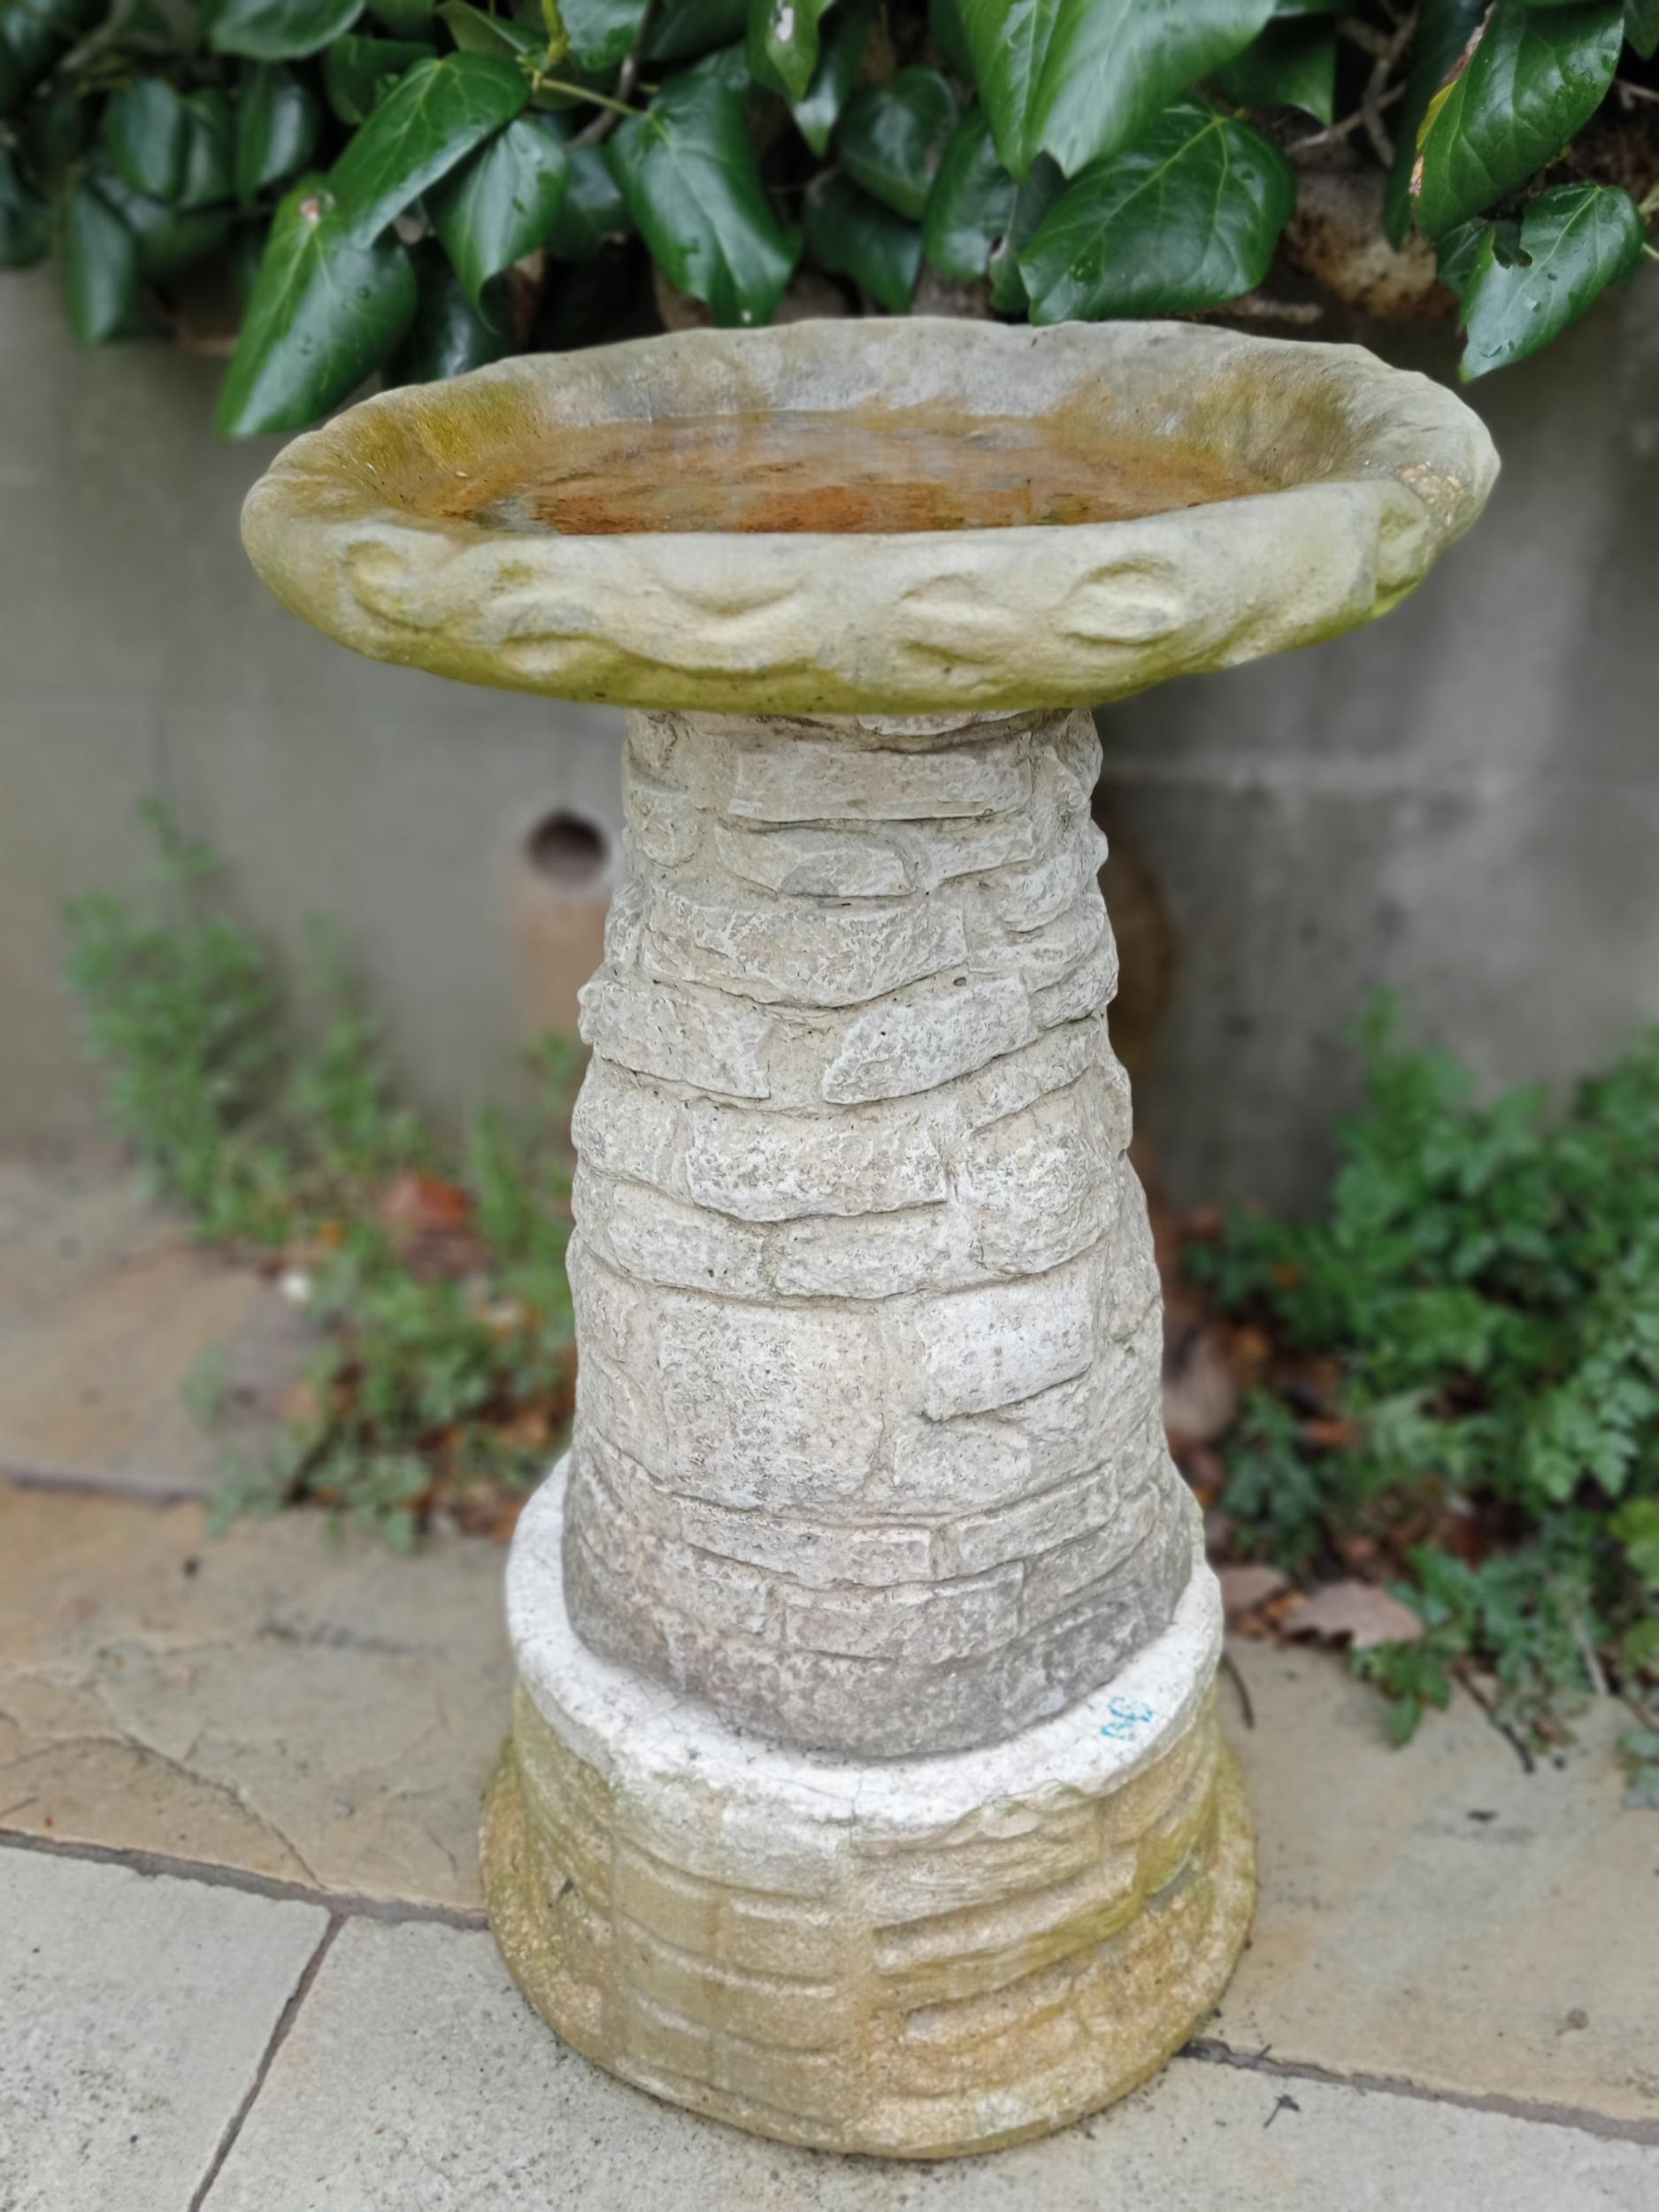 Composition stone bird bath {H 60cm x Dia 36 cm }. (NOT AVAILABLE TO VIEW IN PERSON)